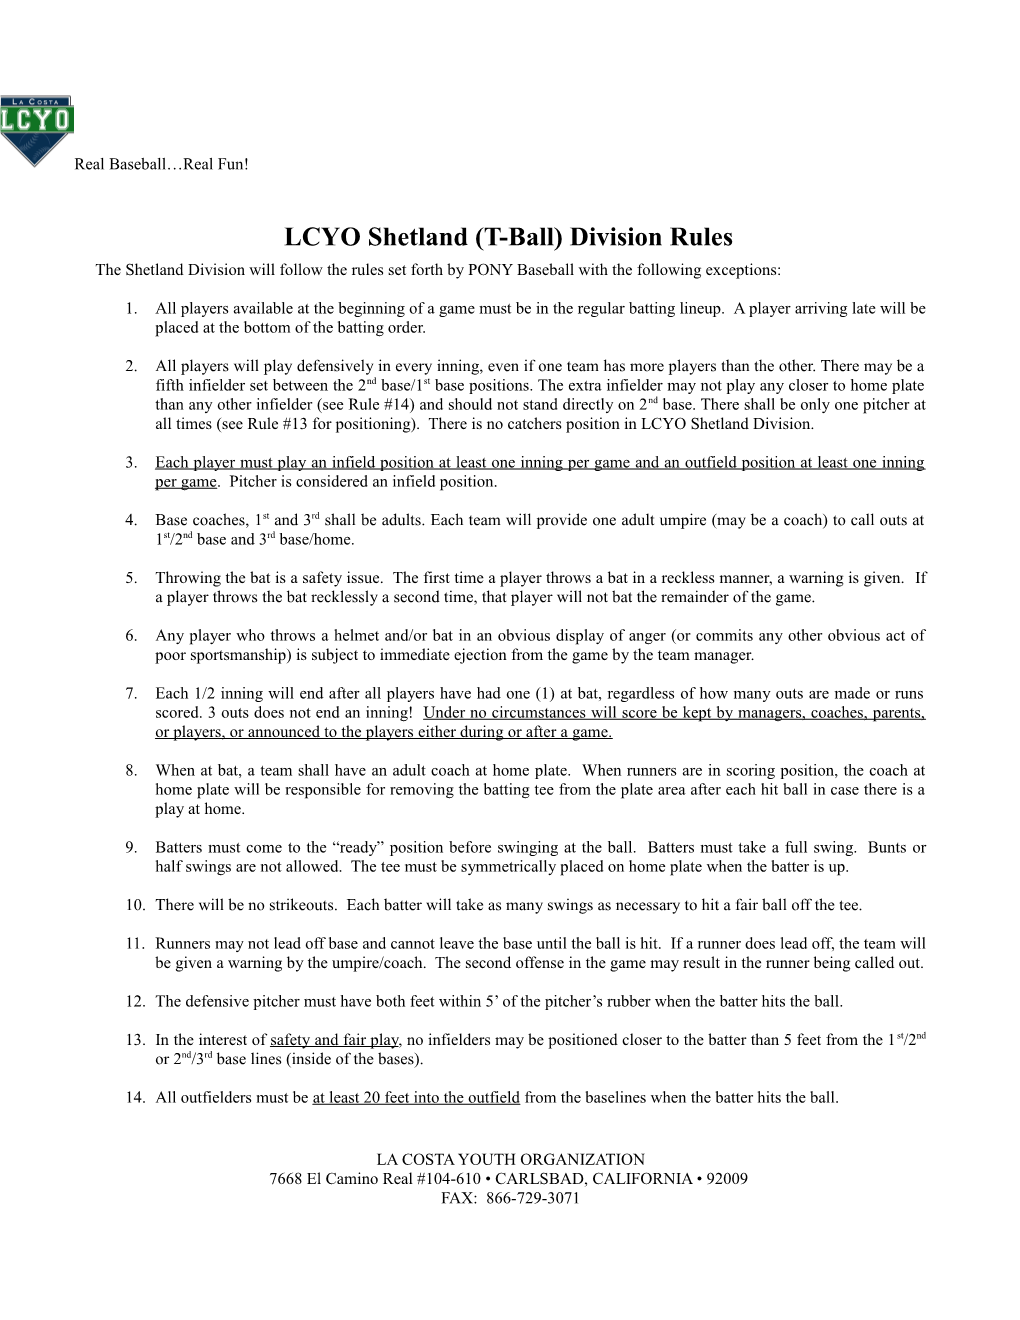 LCYO Shetland (T-Ball) Division Rules